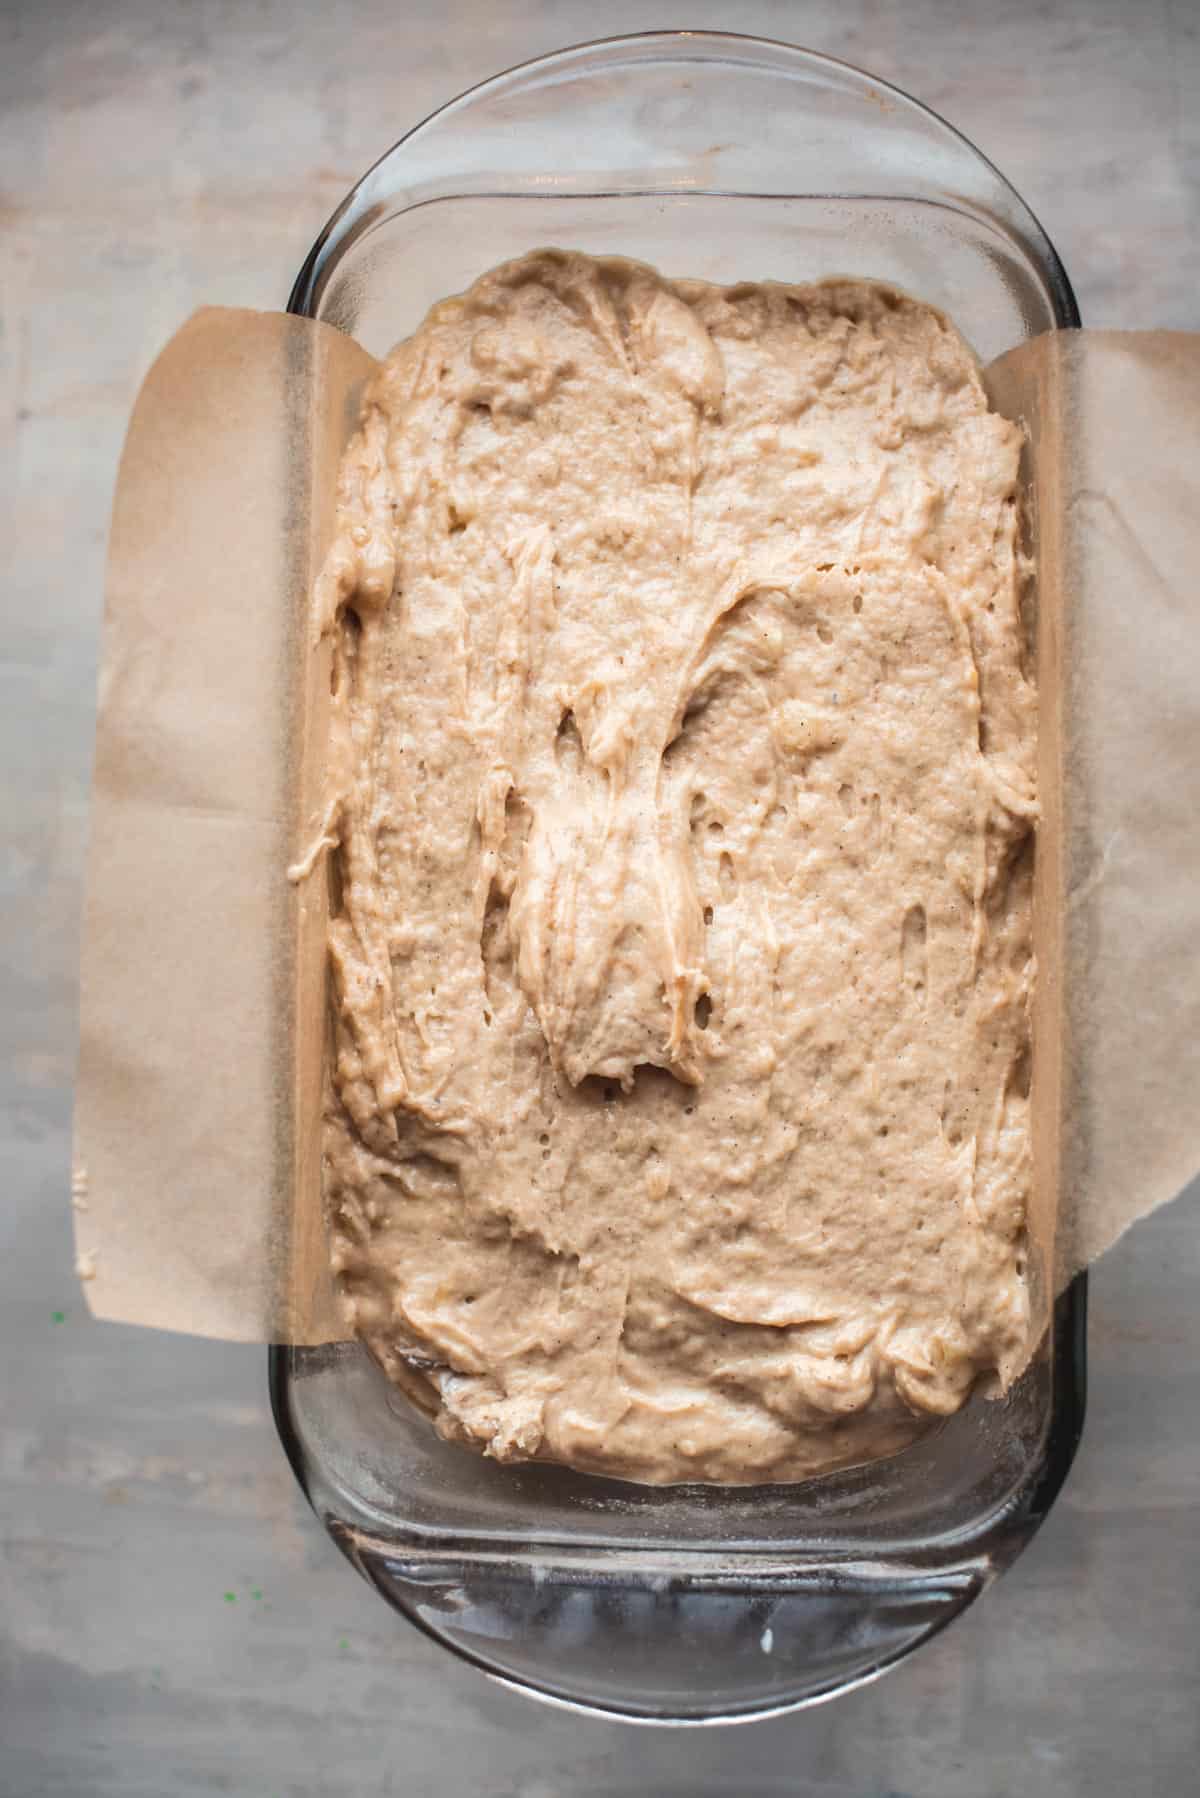 The cake batter has been placed into a parchment lined, glass loaf pan and is sitting on a grey counter.